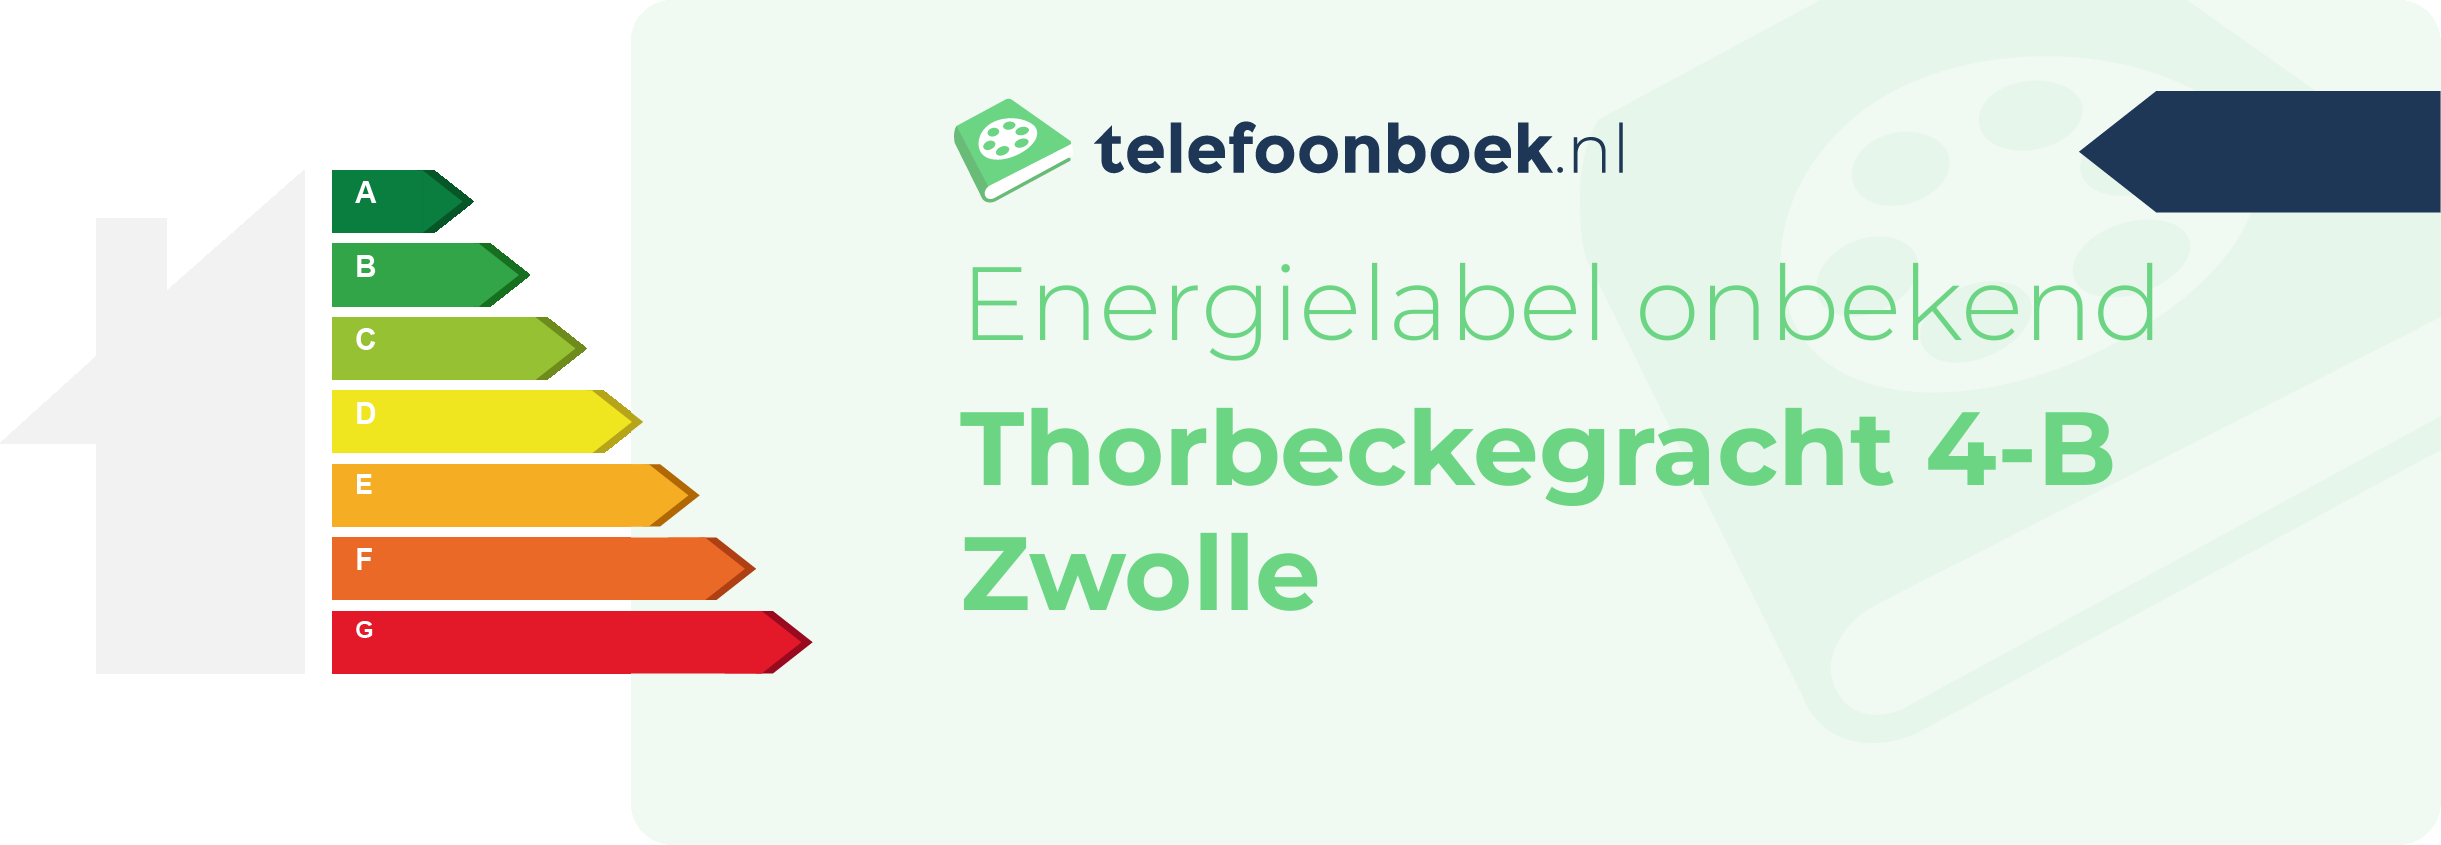 Energielabel Thorbeckegracht 4-B Zwolle